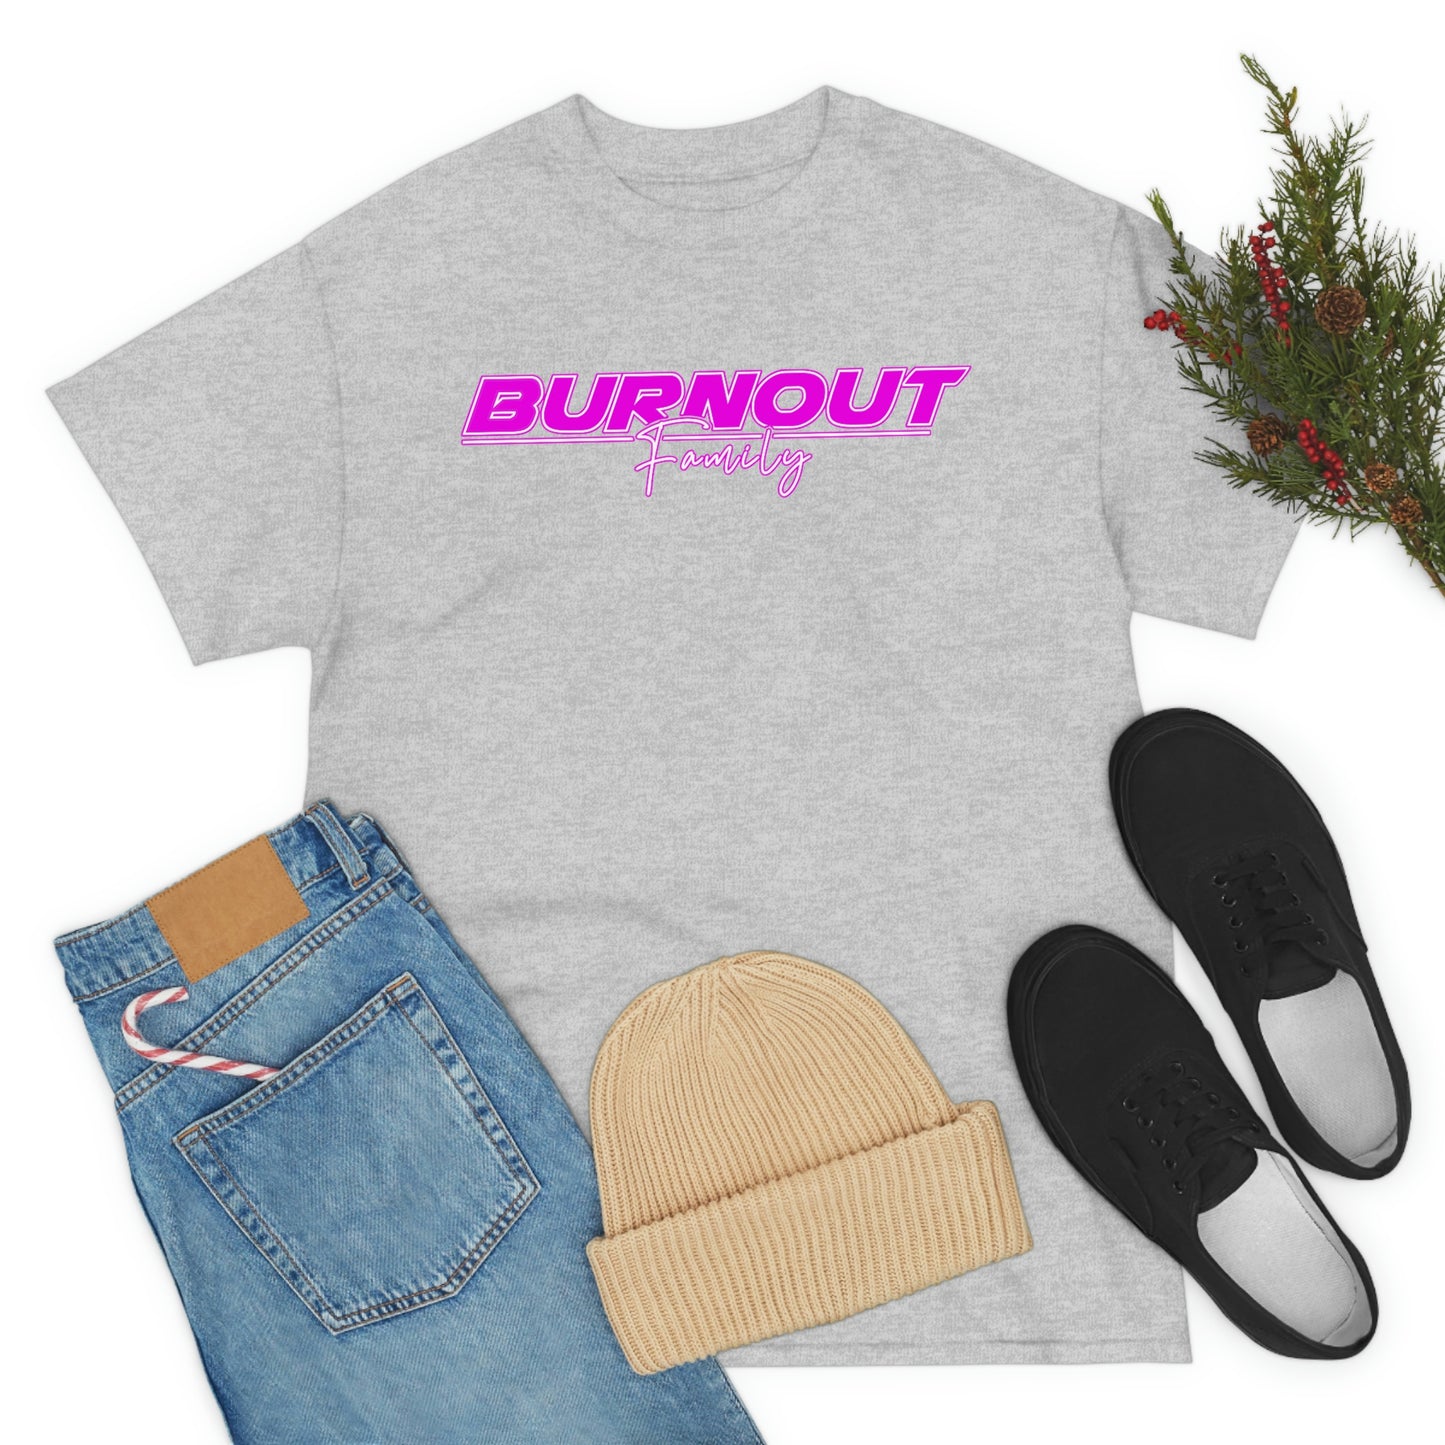 Burnout Family - HOT PINK